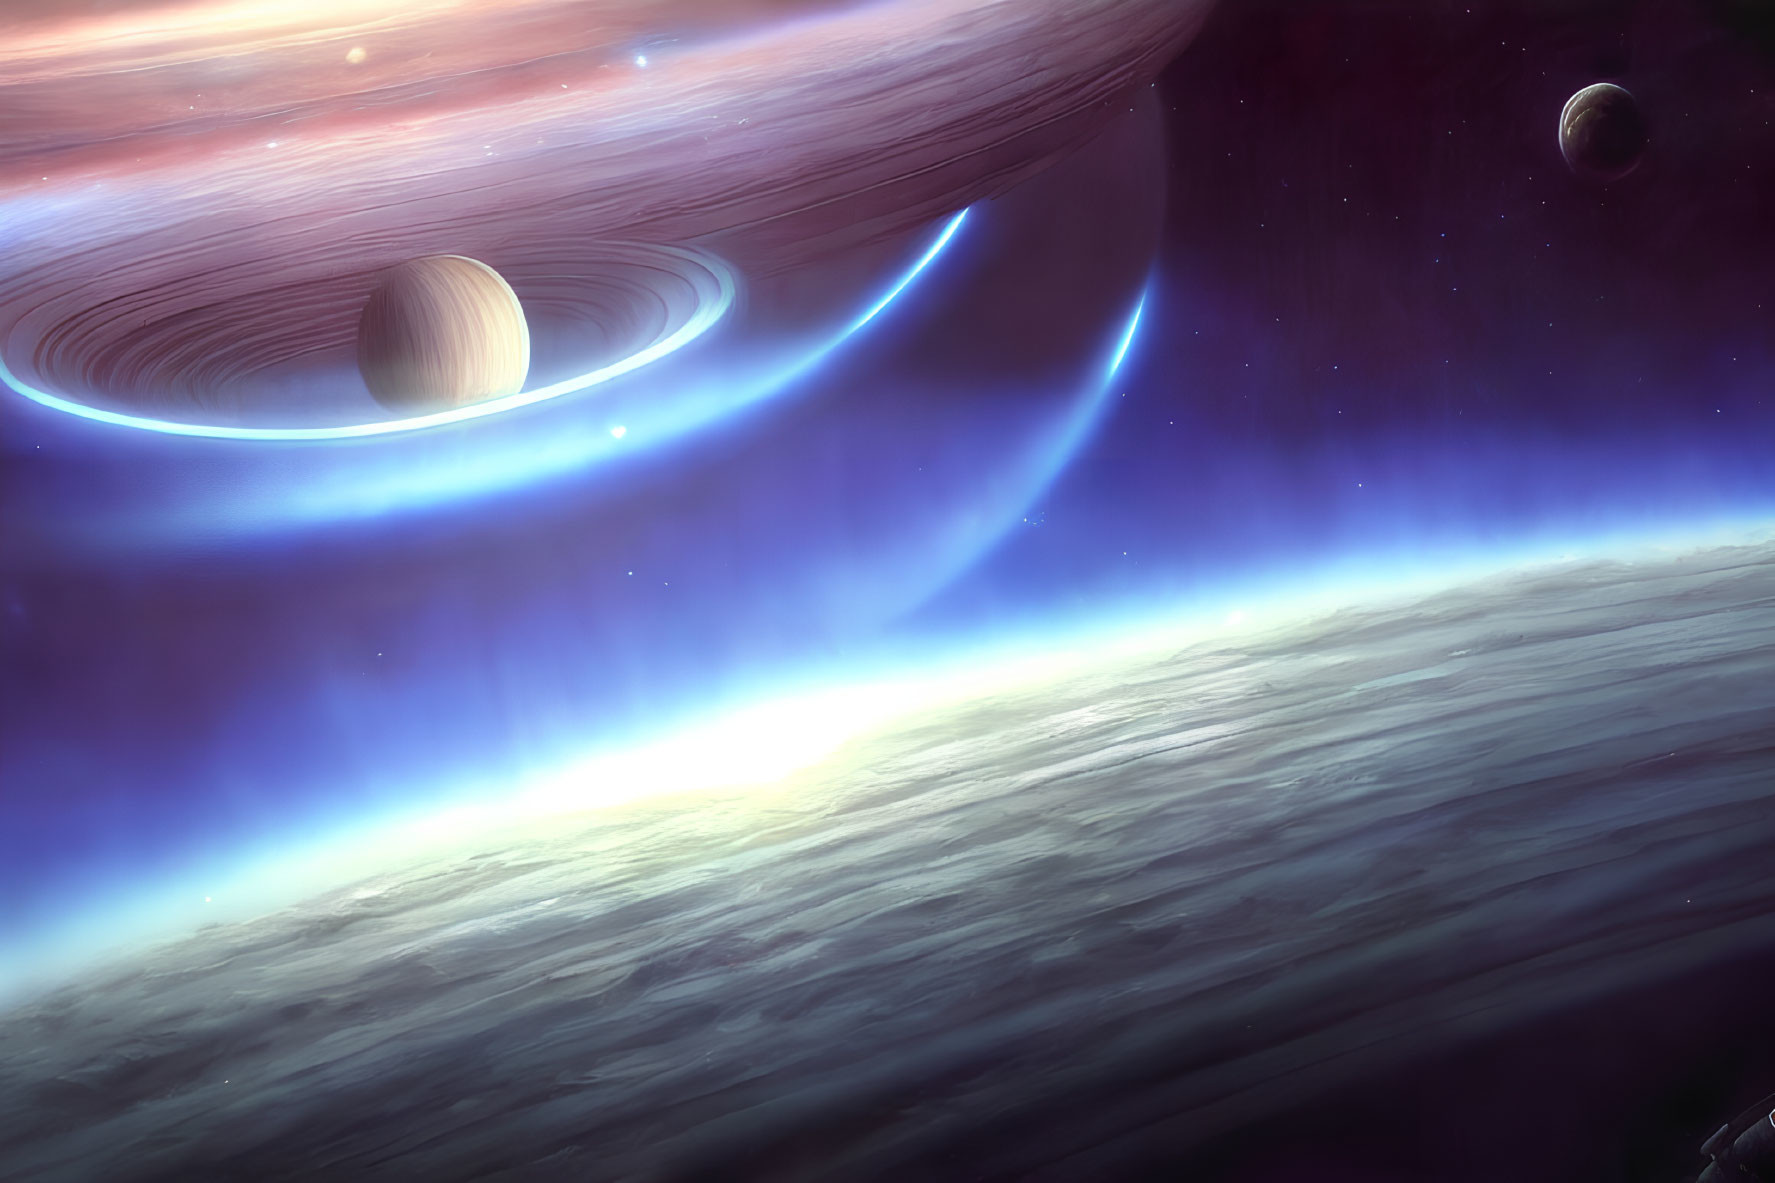 Sci-fi space scene: Ringed gas giant, moons, nebula, rocky planetary surface